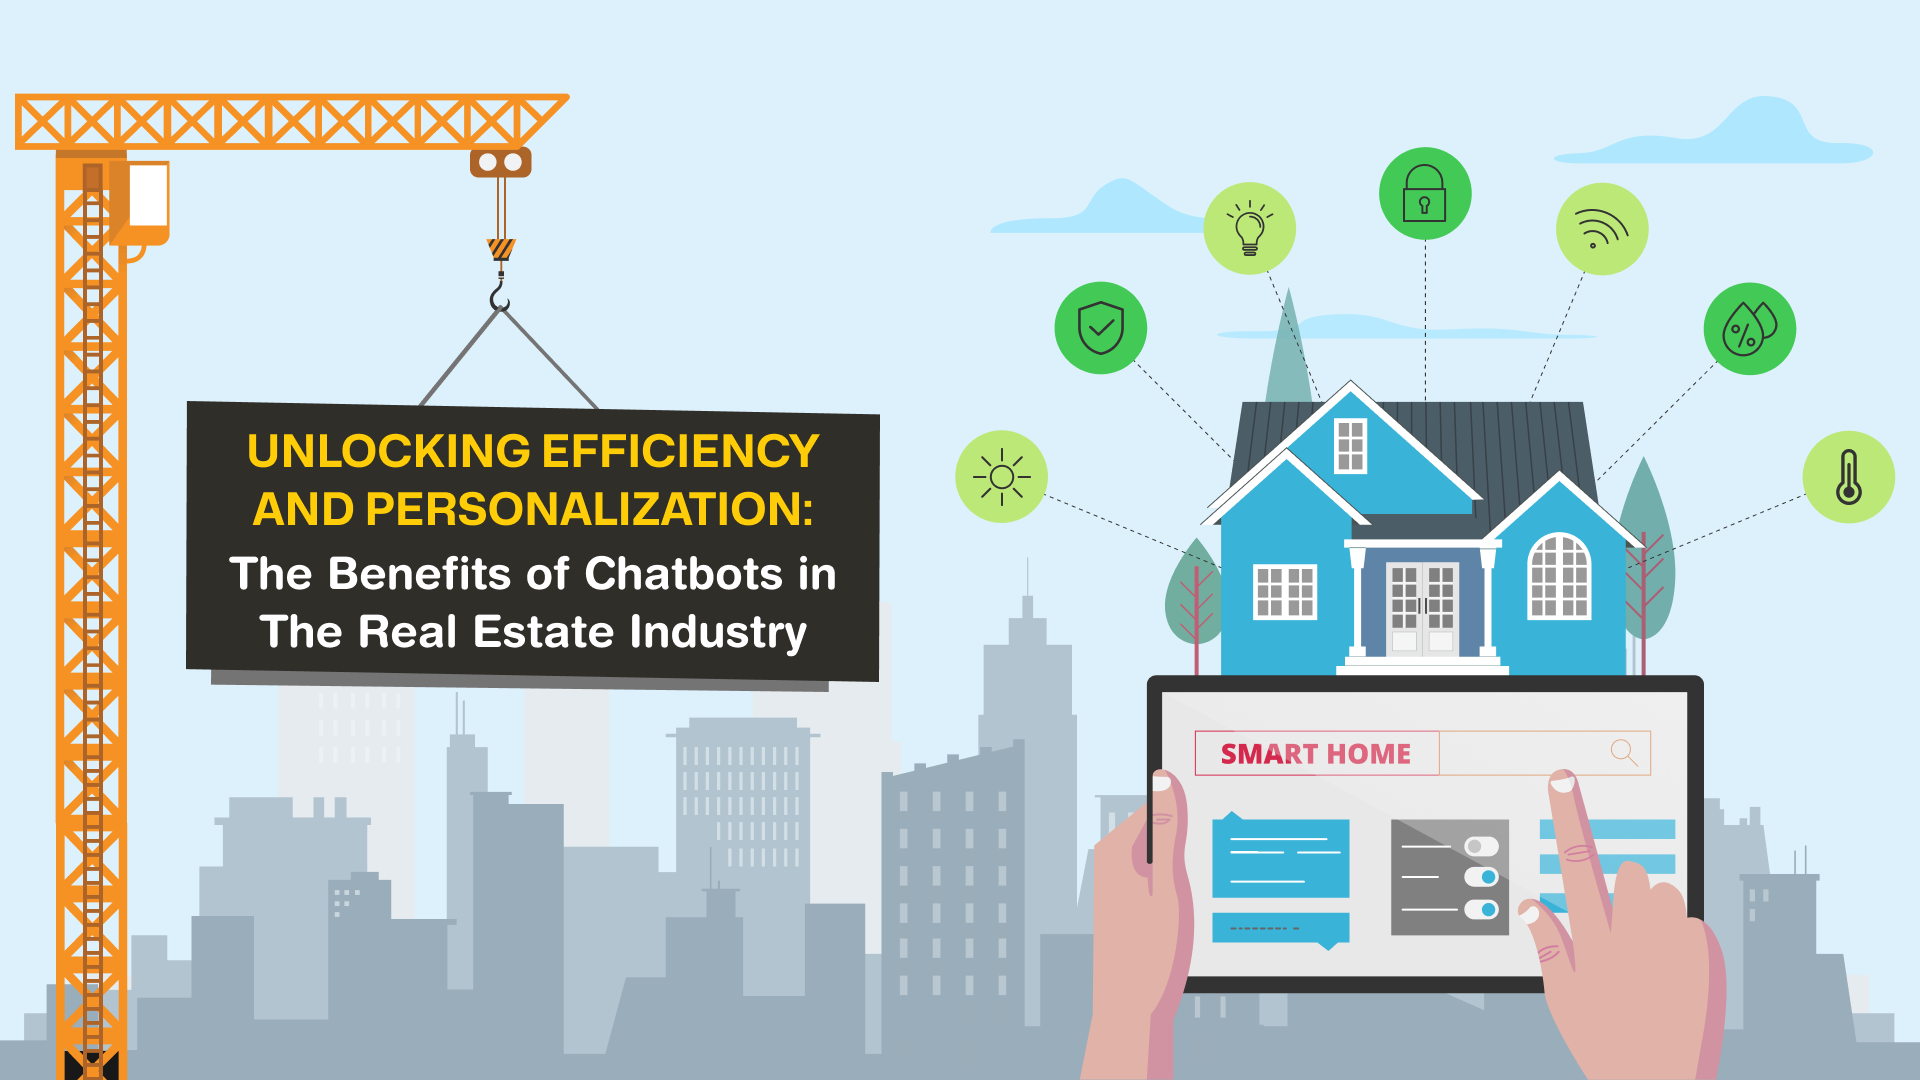 UNLOCKING EFFICIENCY AND PERSONALIZATION_ THE BENEFITS OF CHATBOTS IN THE REAL ESTATE INDUSTRY